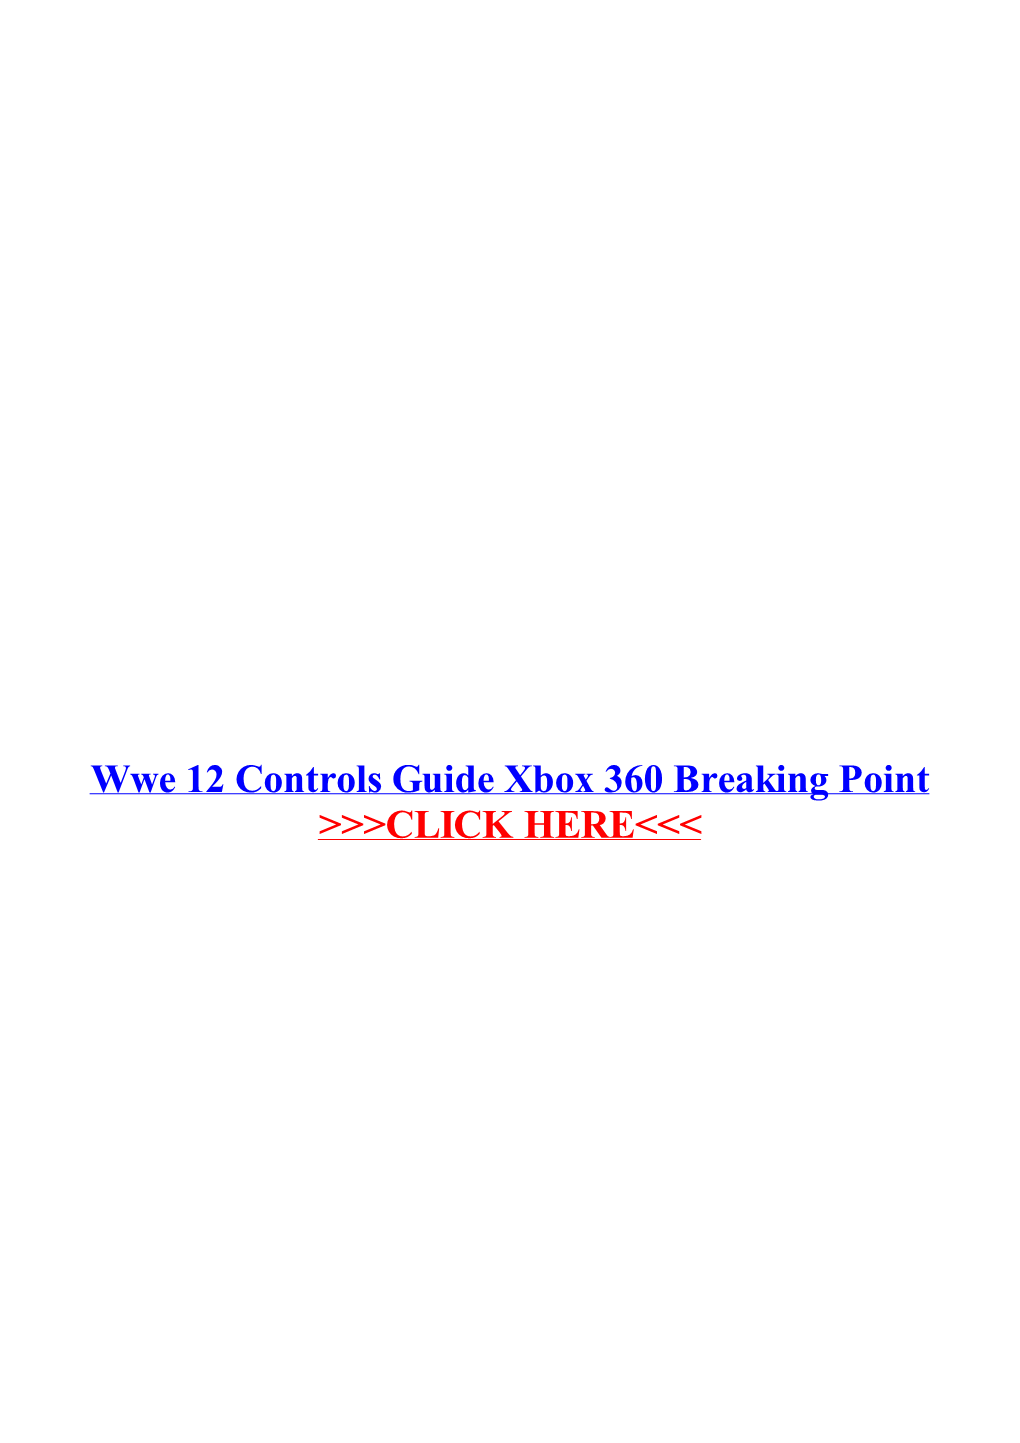 Wwe 12 Controls Guide Xbox 360 Breaking Point.Pdf